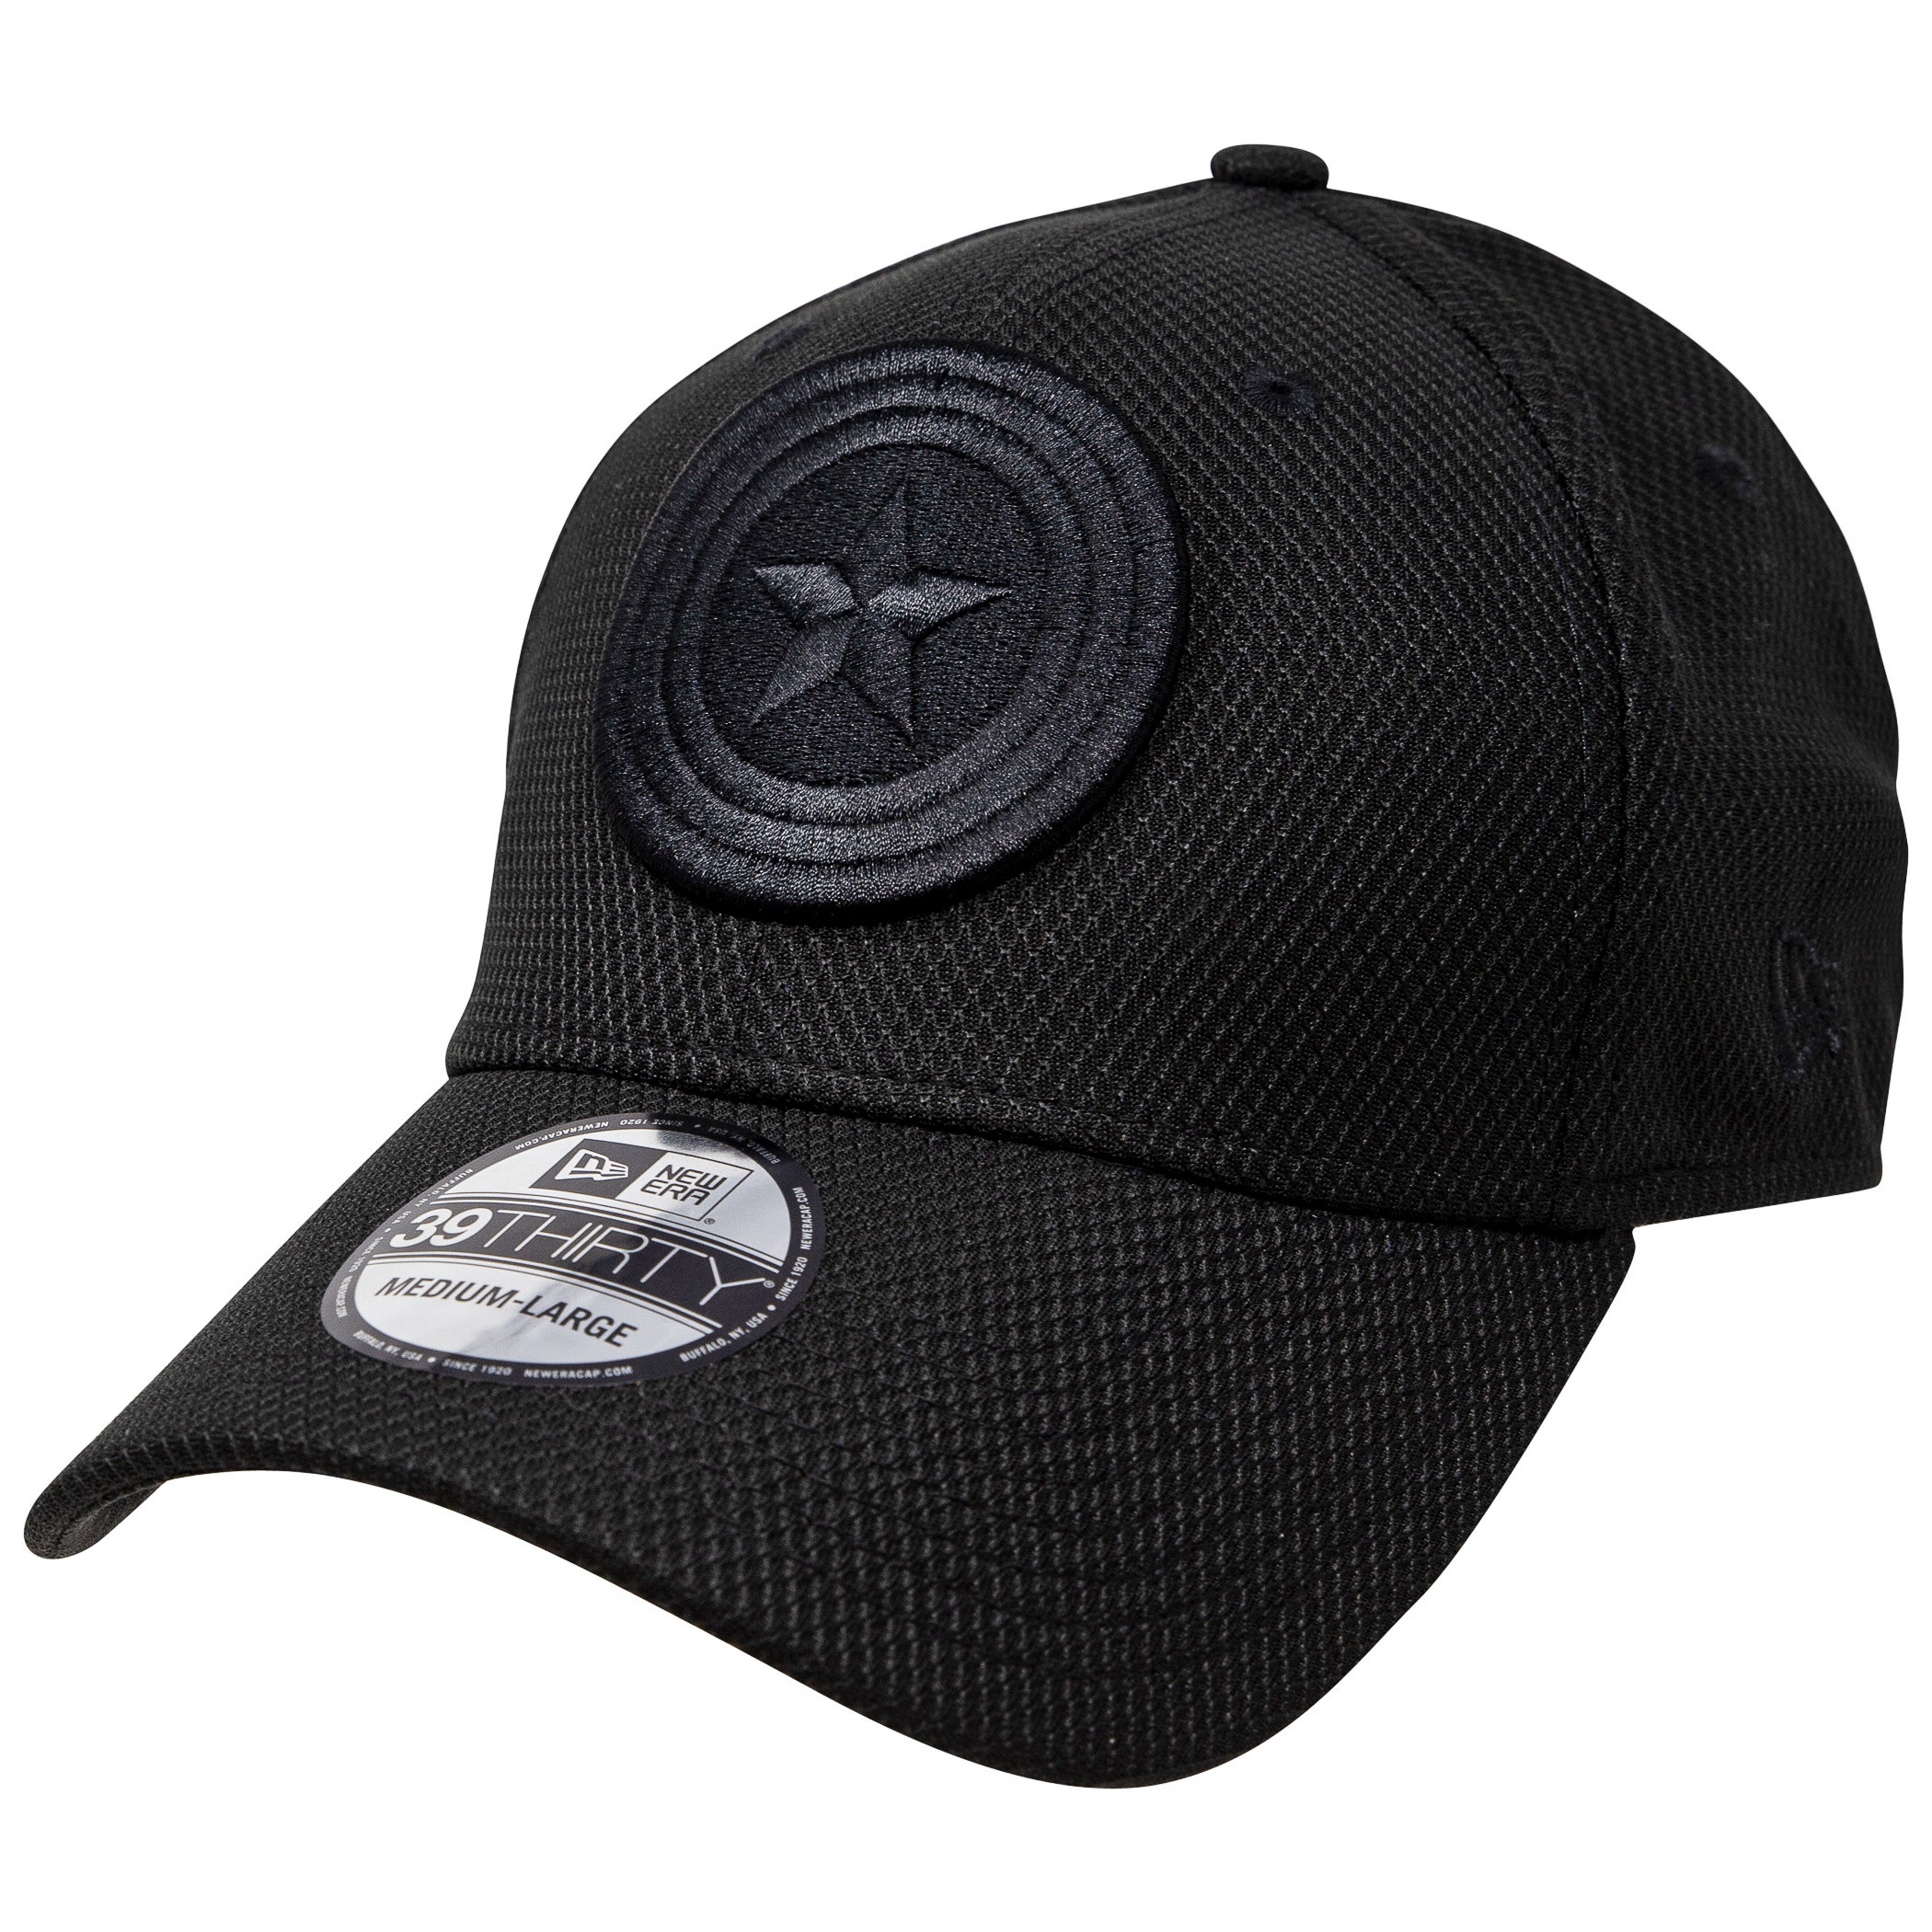 Long Live Captain America MCU Memorial New Era 39Thirty Flex Fitted Hat